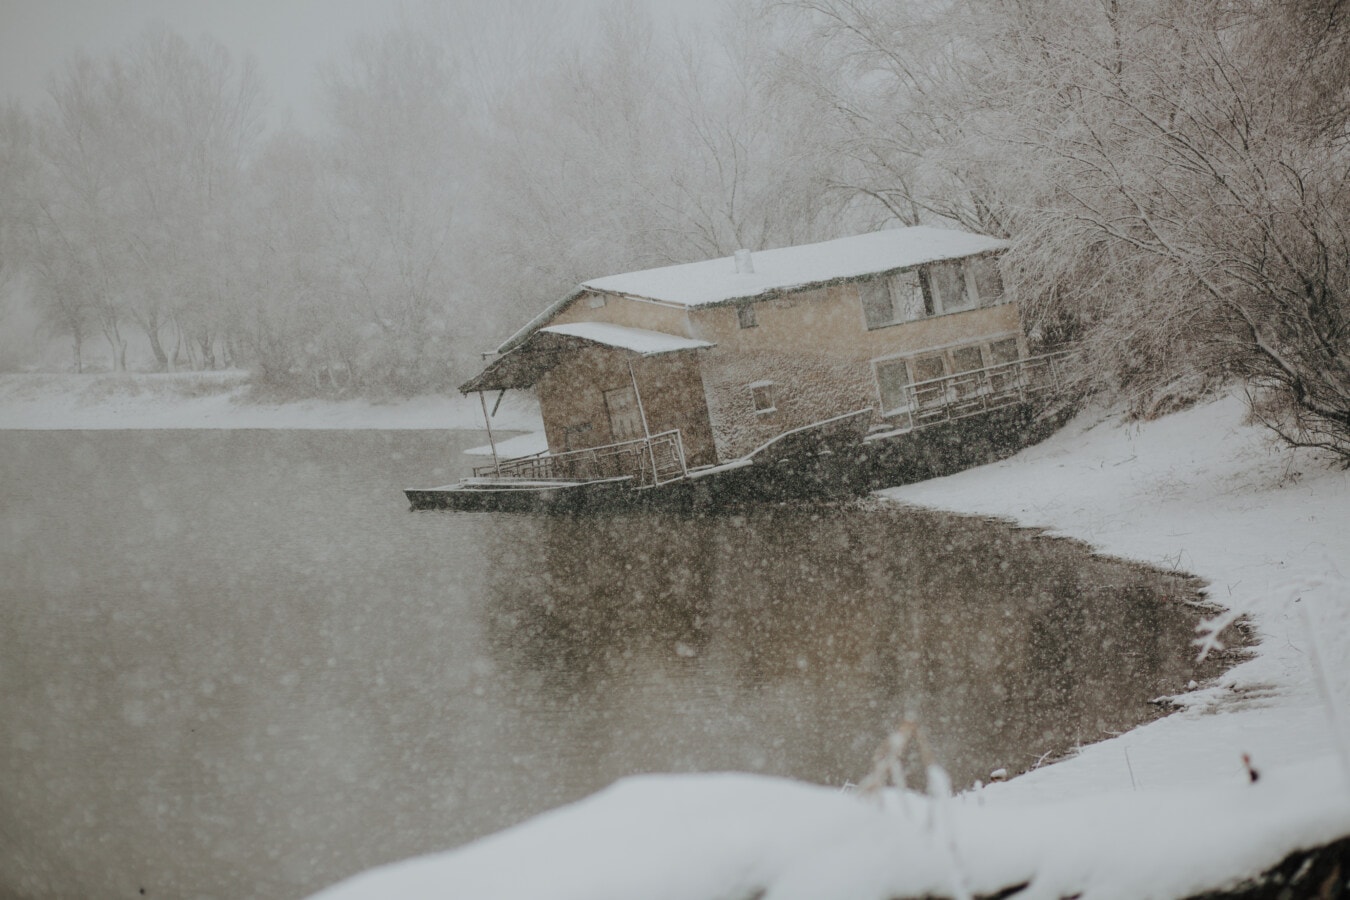 lakeside, winter, majestic, cottage, snowflakes, flood, coast, snowstorm, tide water, storm